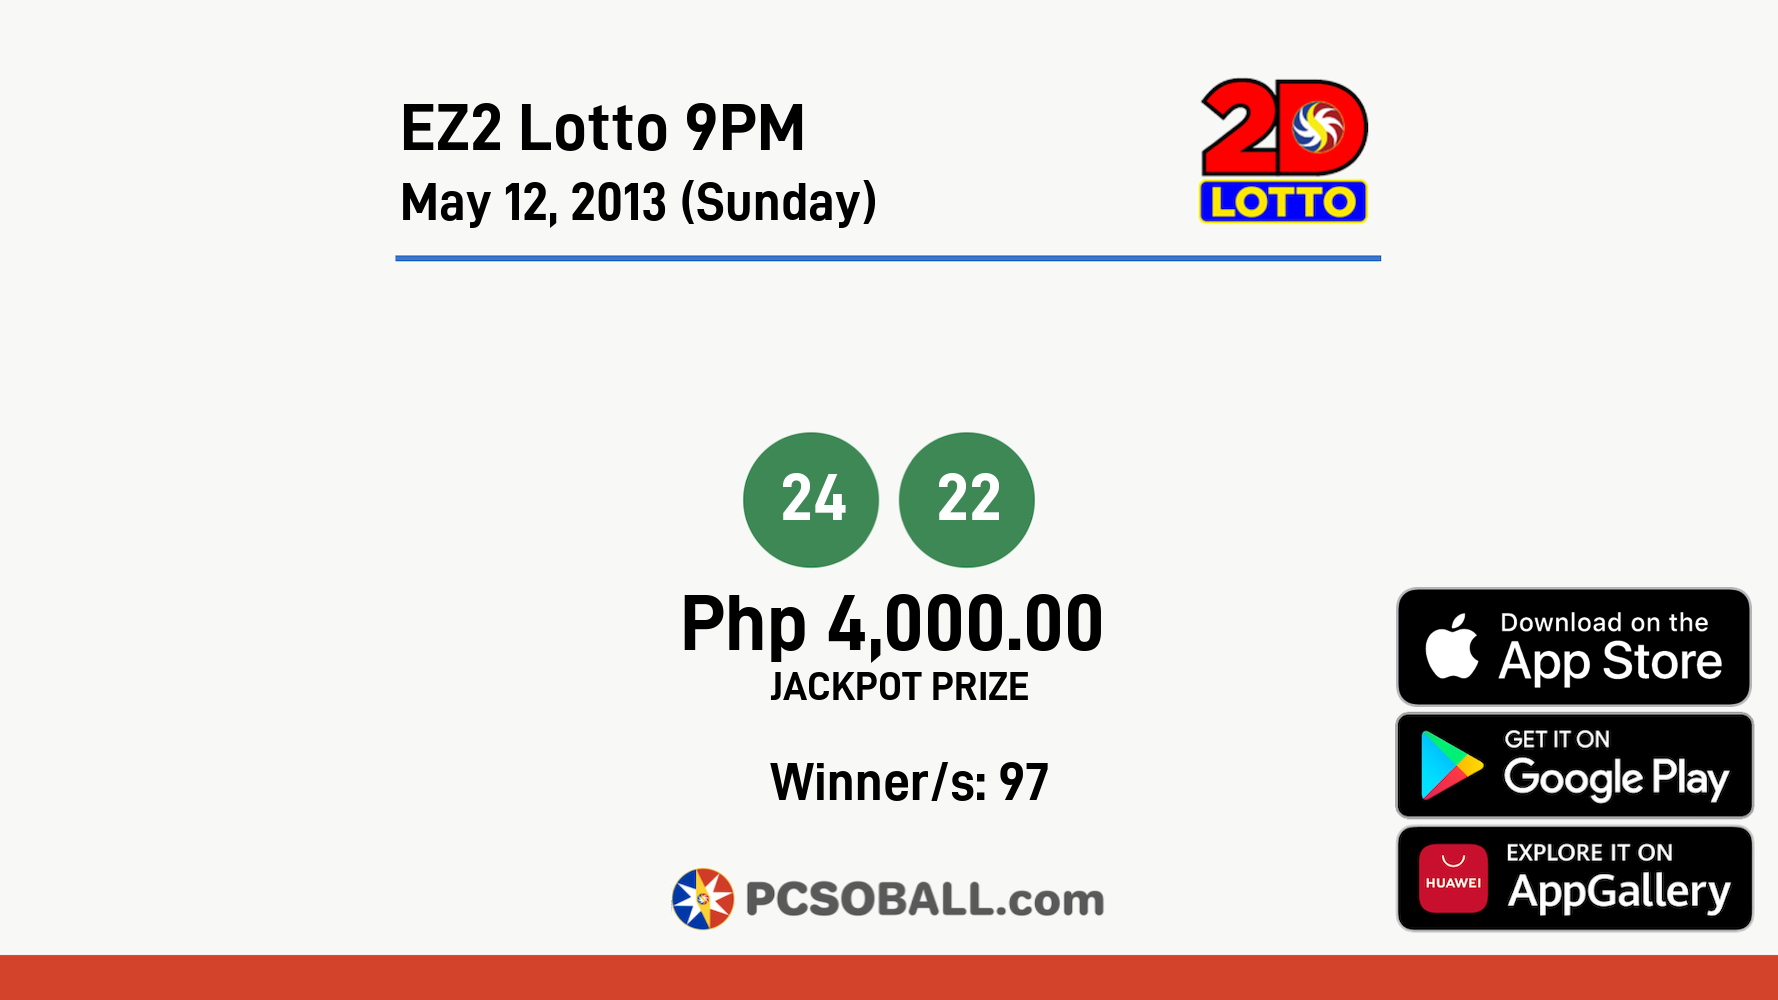 EZ2 Lotto 9PM May 12, 2013 (Sunday) Result